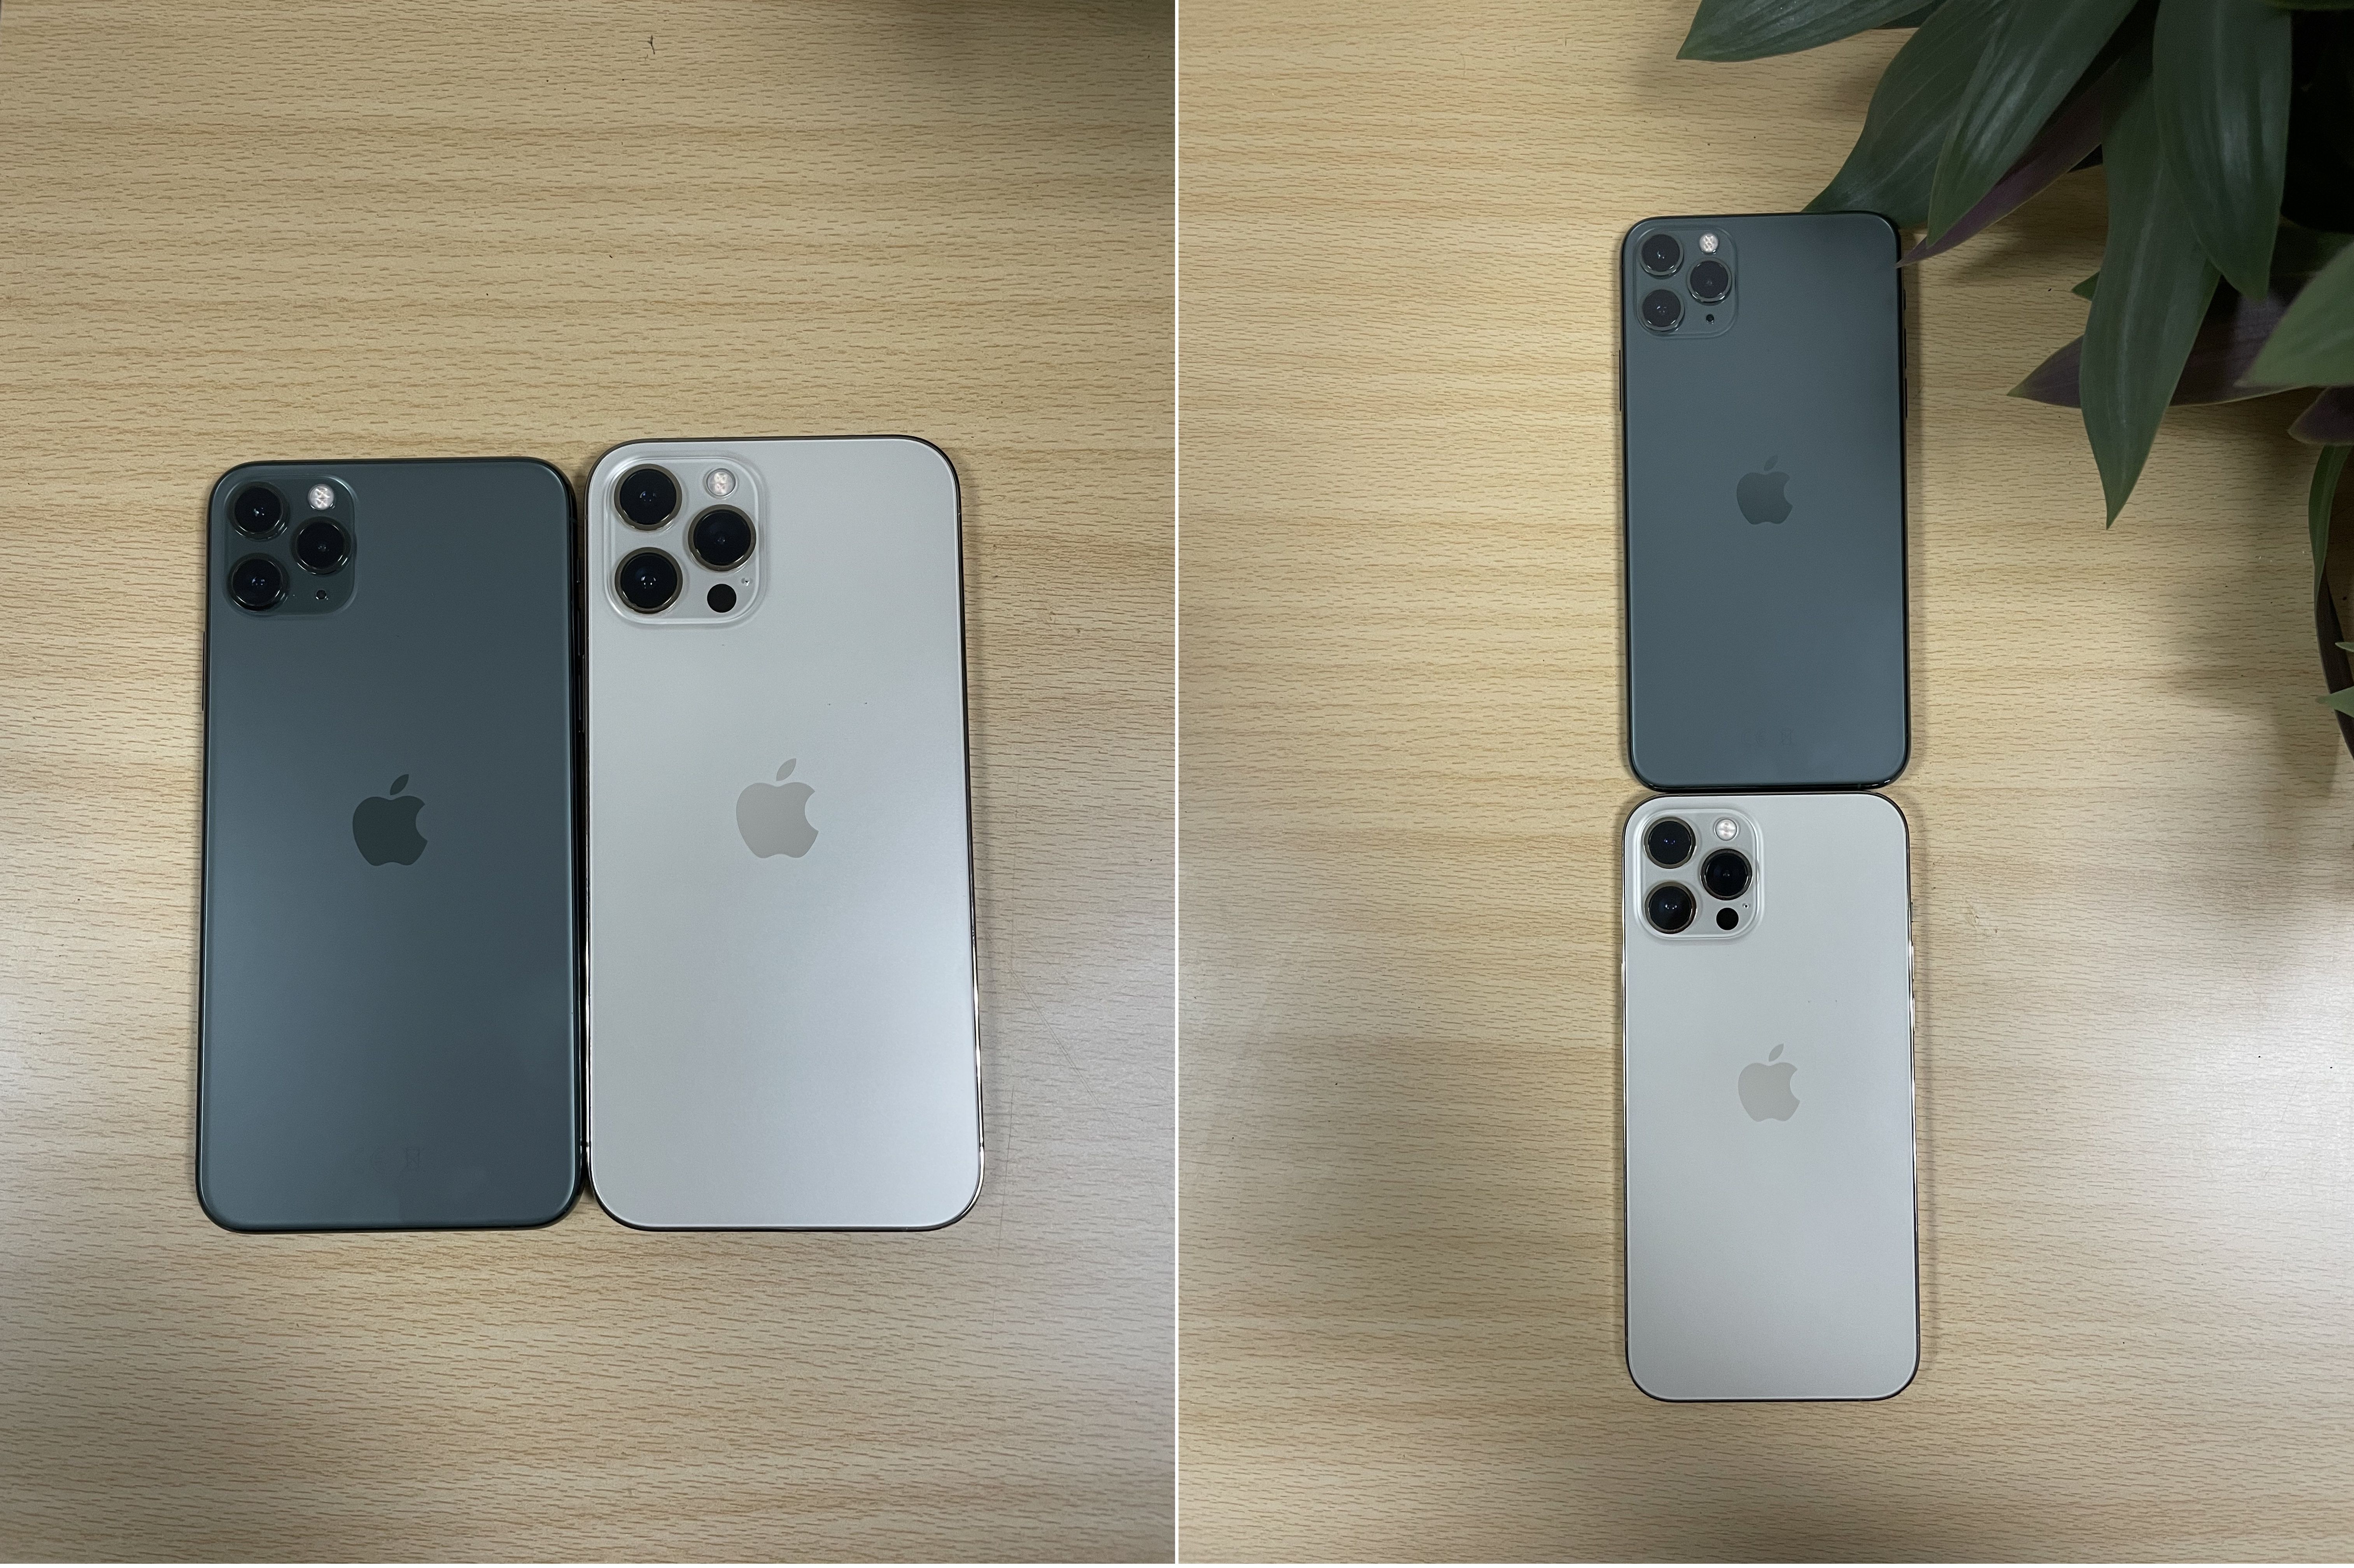 REVIEW: Apple iPhone 12 Pro Max (https://images.alkhaleejtoday.co/assets/jpg/KT26713119.JPG)